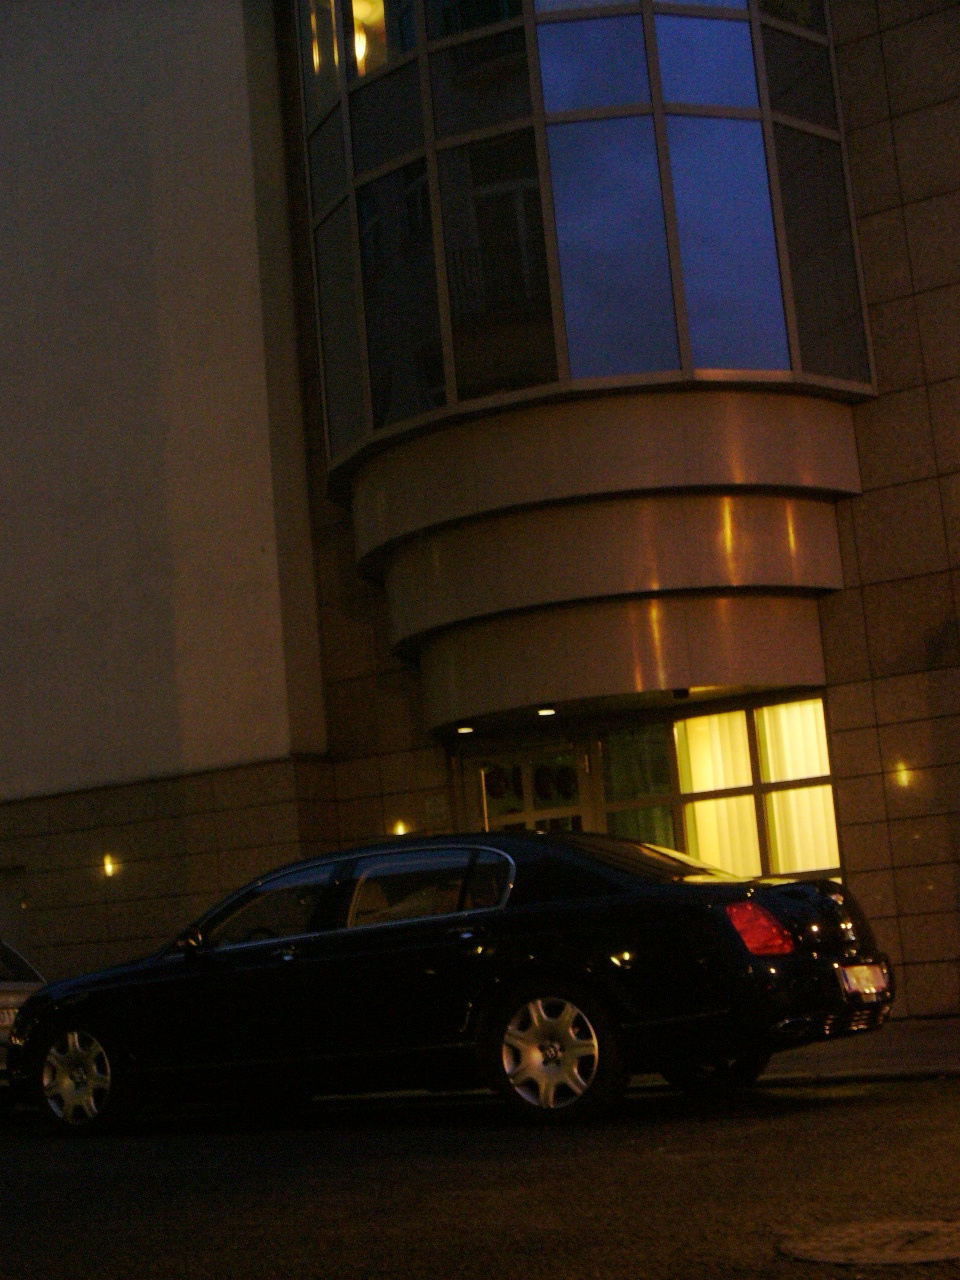 Bentley Continental Flying spur